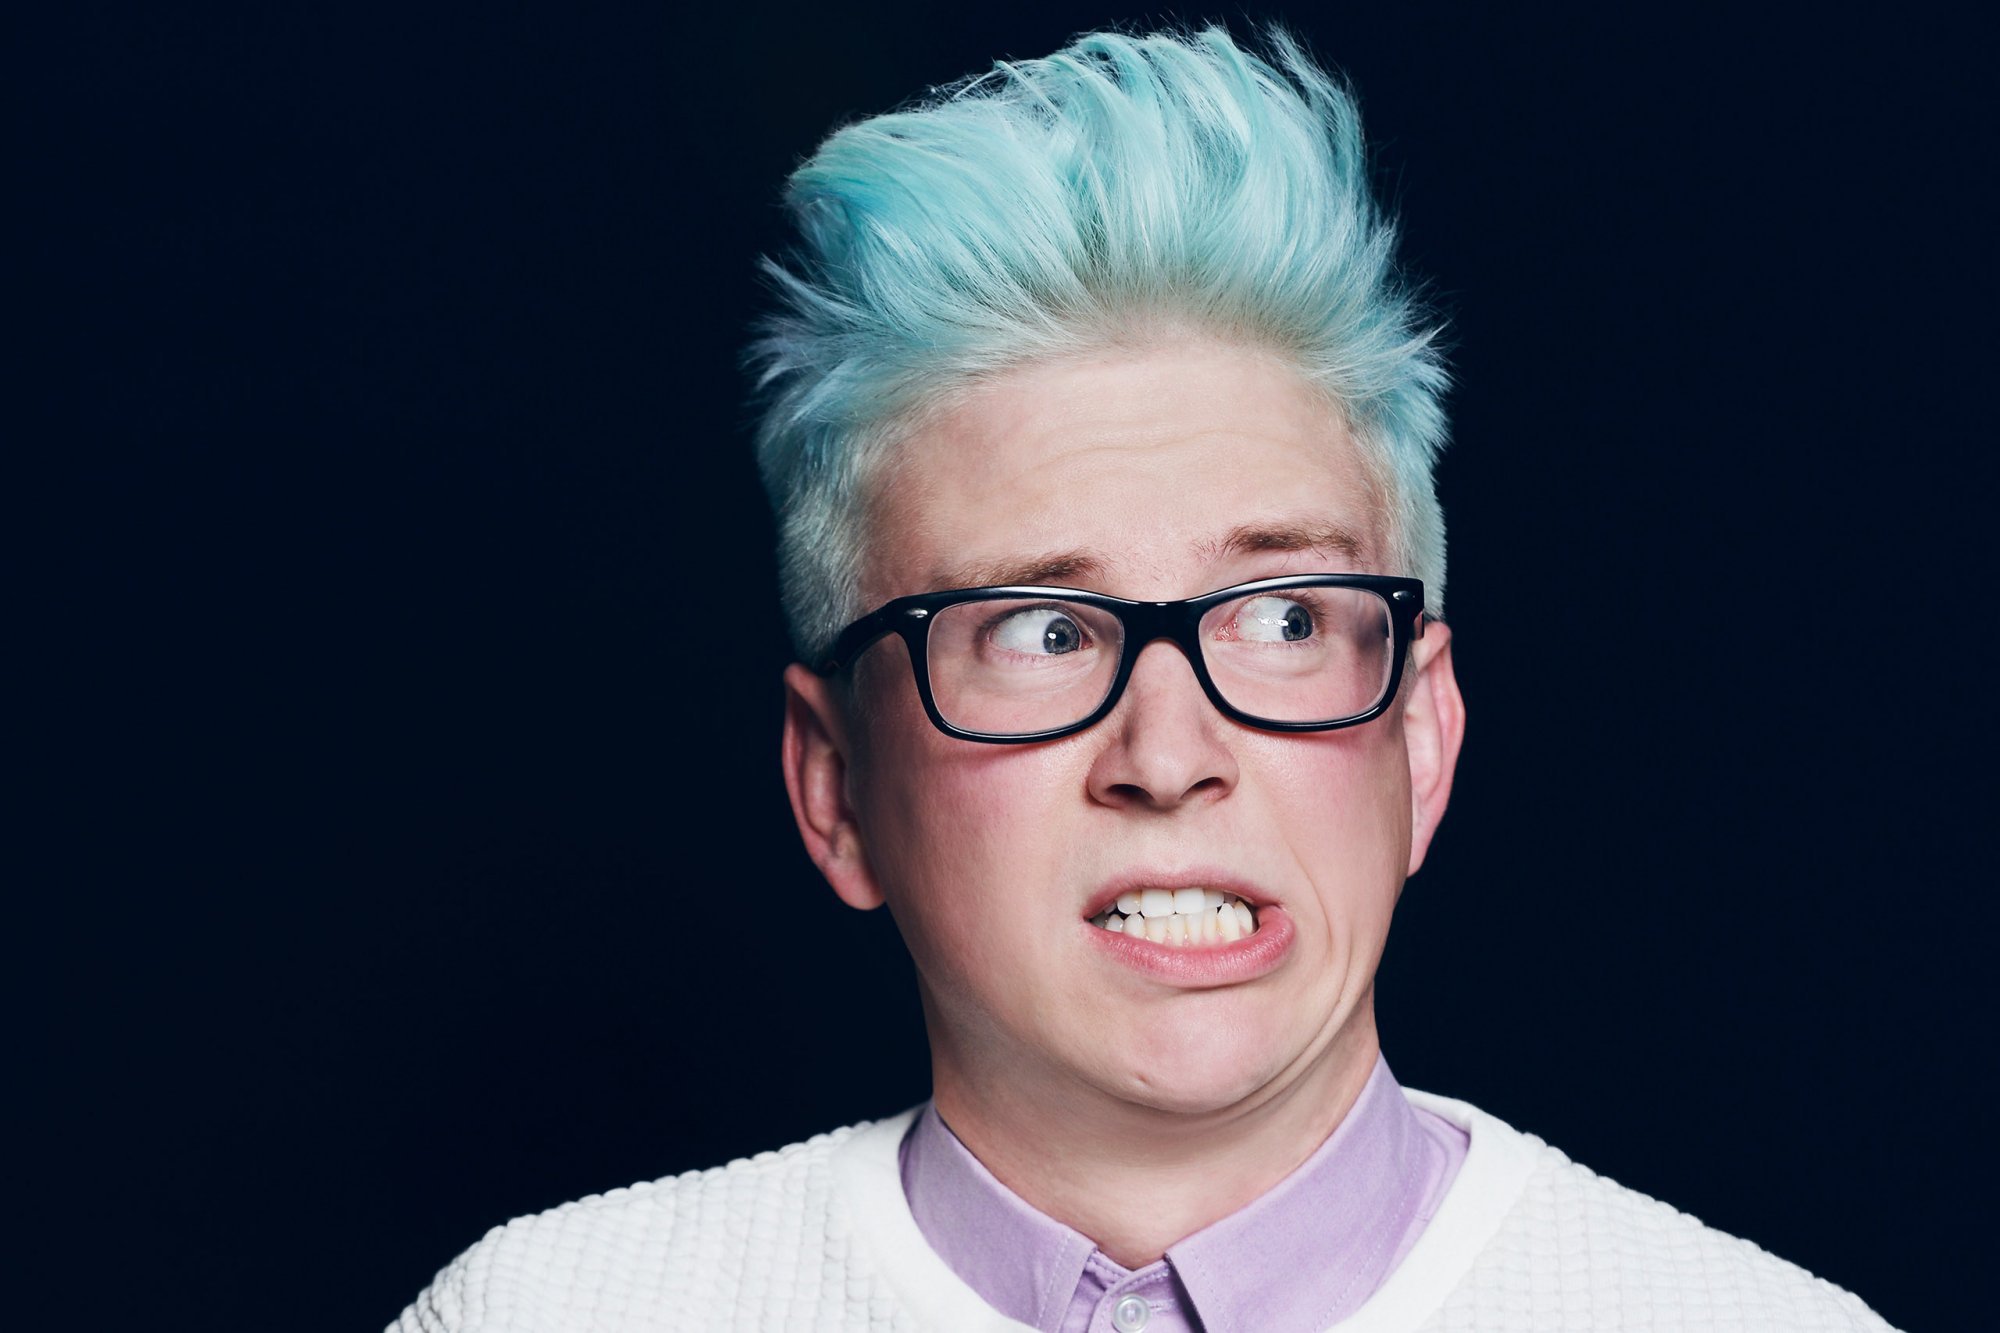 6. Tyler Oakley's blue hair: a symbol of self-expression - wide 4